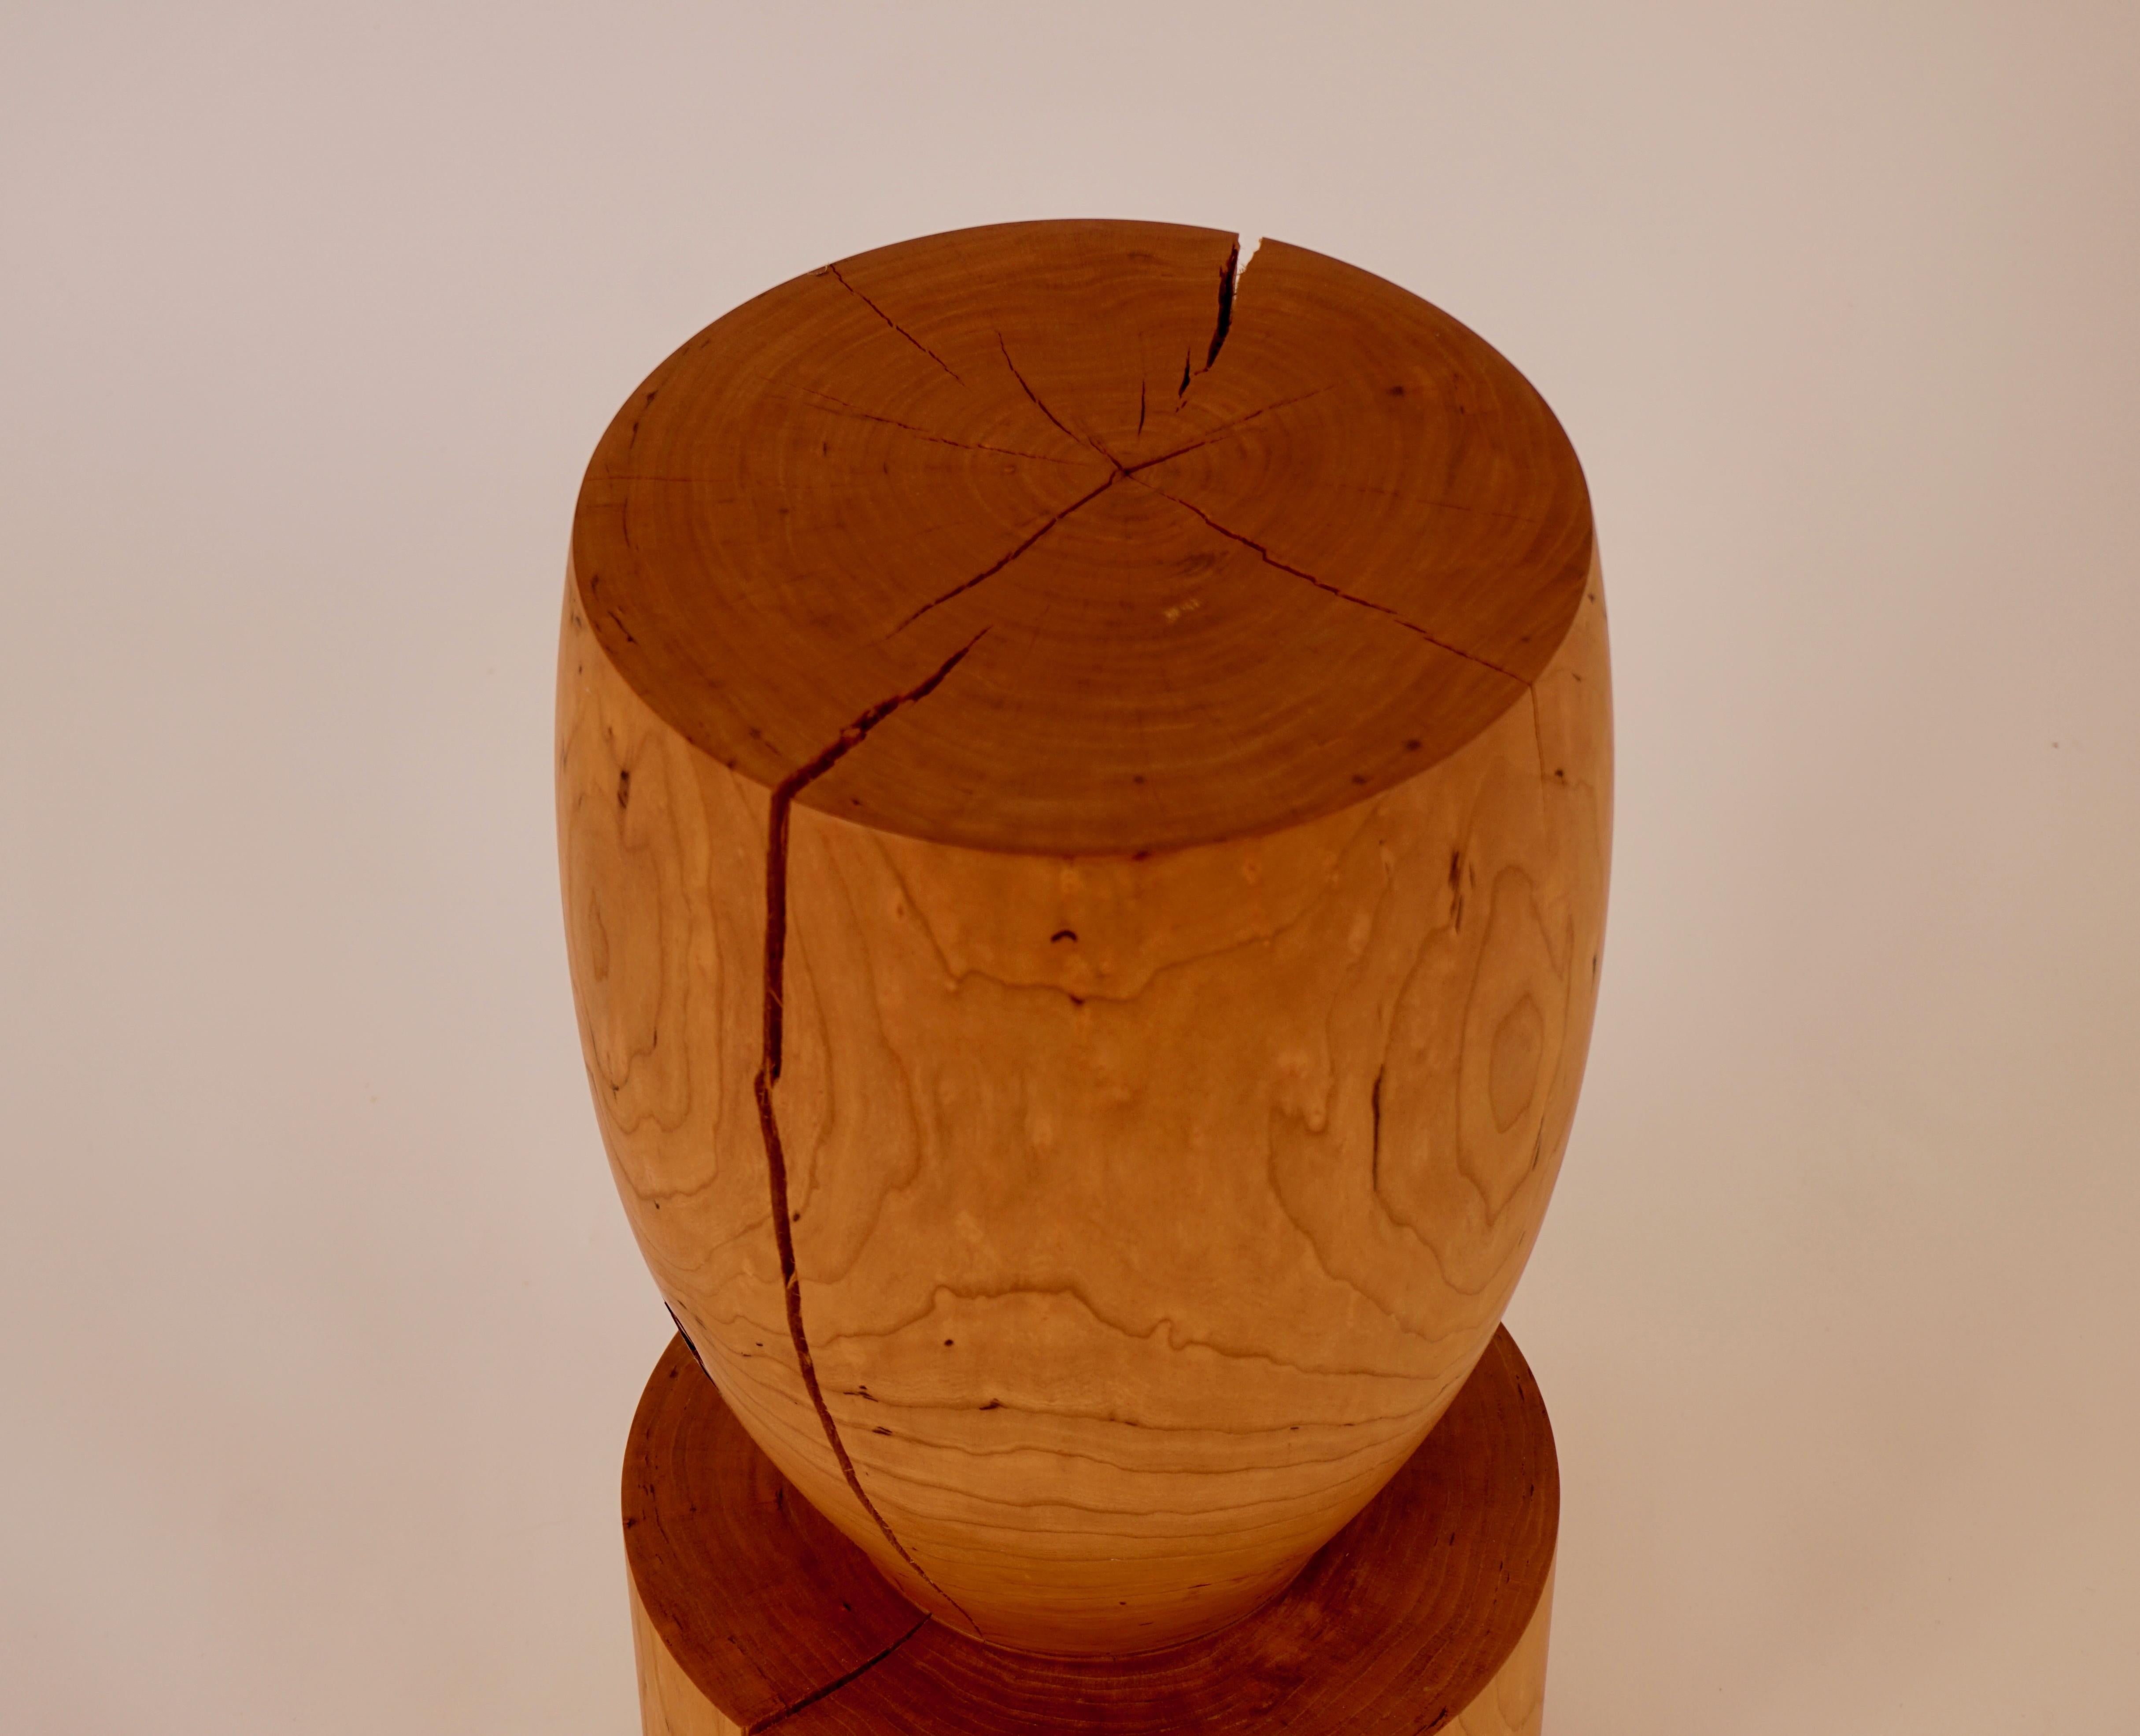 This mini-pedestal table #3 in cherry is one of the ten original shapes in the Lehrecke Pedestal collection from 1996. What makes this piece special is the quality of the wood. Cherry is a beautiful local wood. This log was very high quality - all